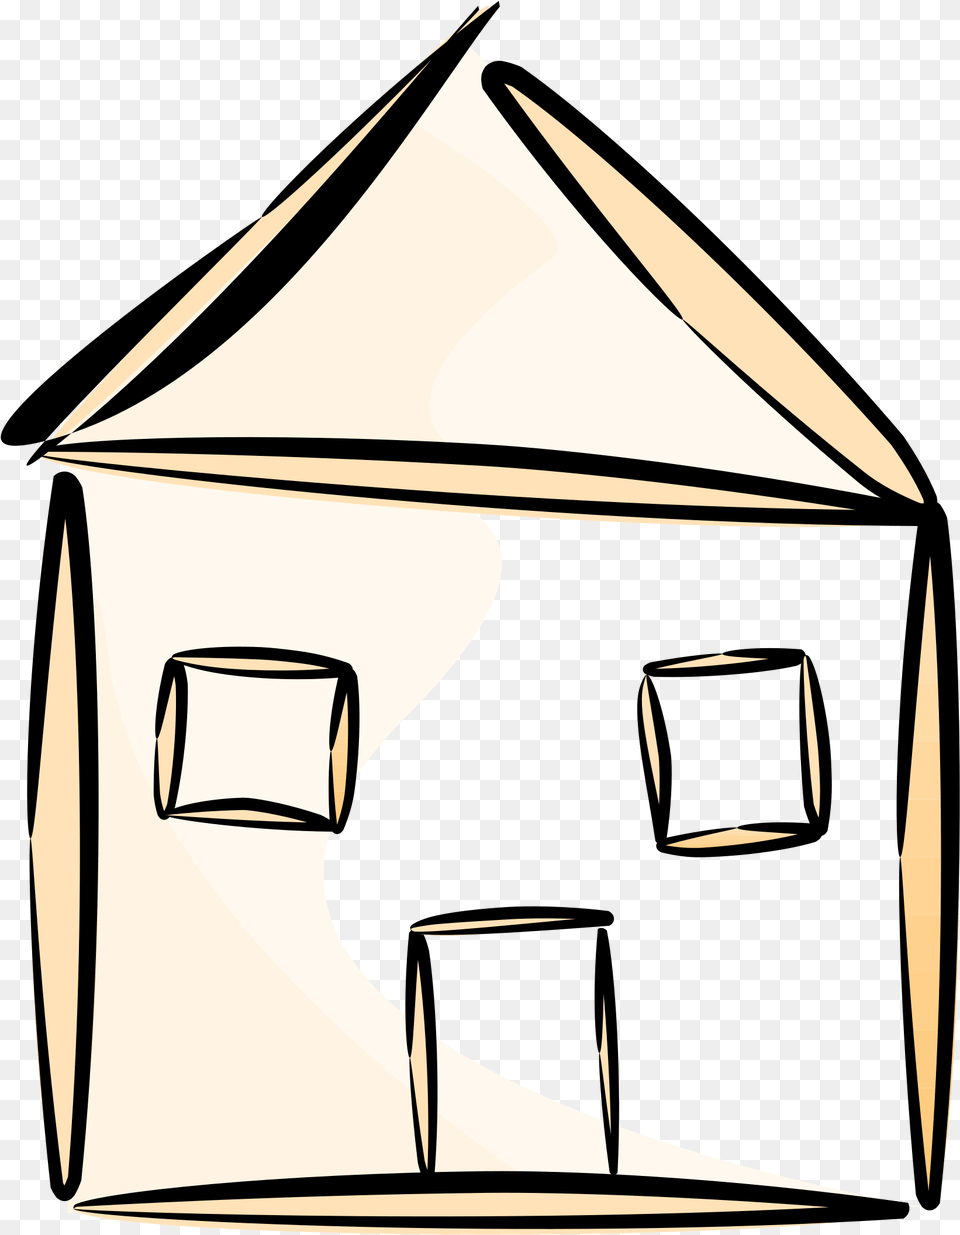 Building House Home Stylized Simple Outline House Outline Clipart, Outdoors, Tent, Nature, Architecture Png Image